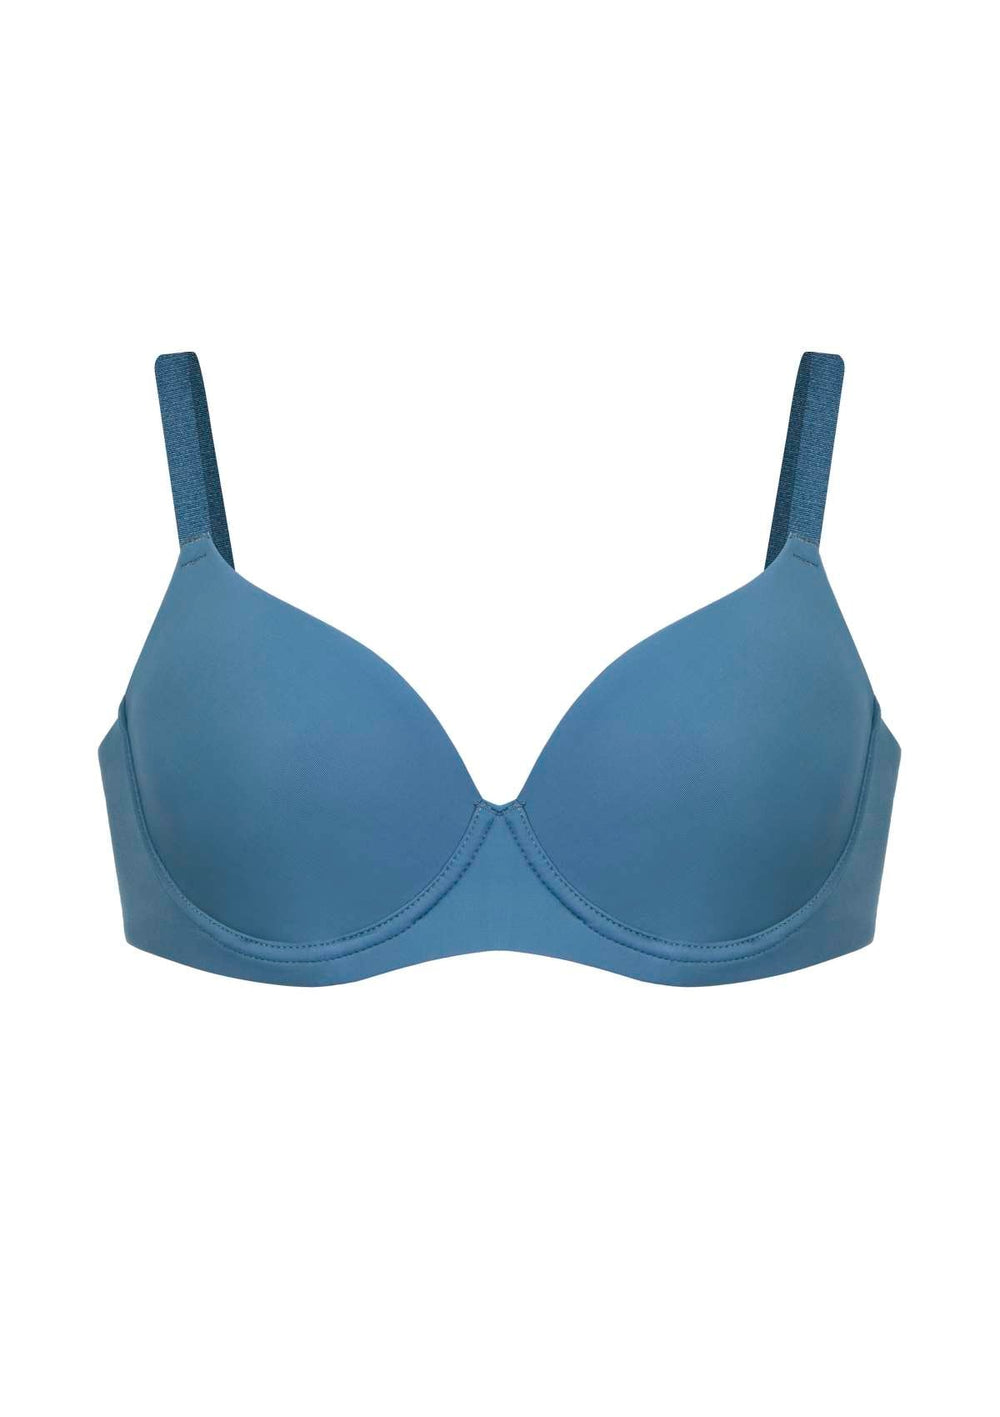 Buy A-GG Turquoise Soft Touch T-Shirt Bra - 42G, Bras